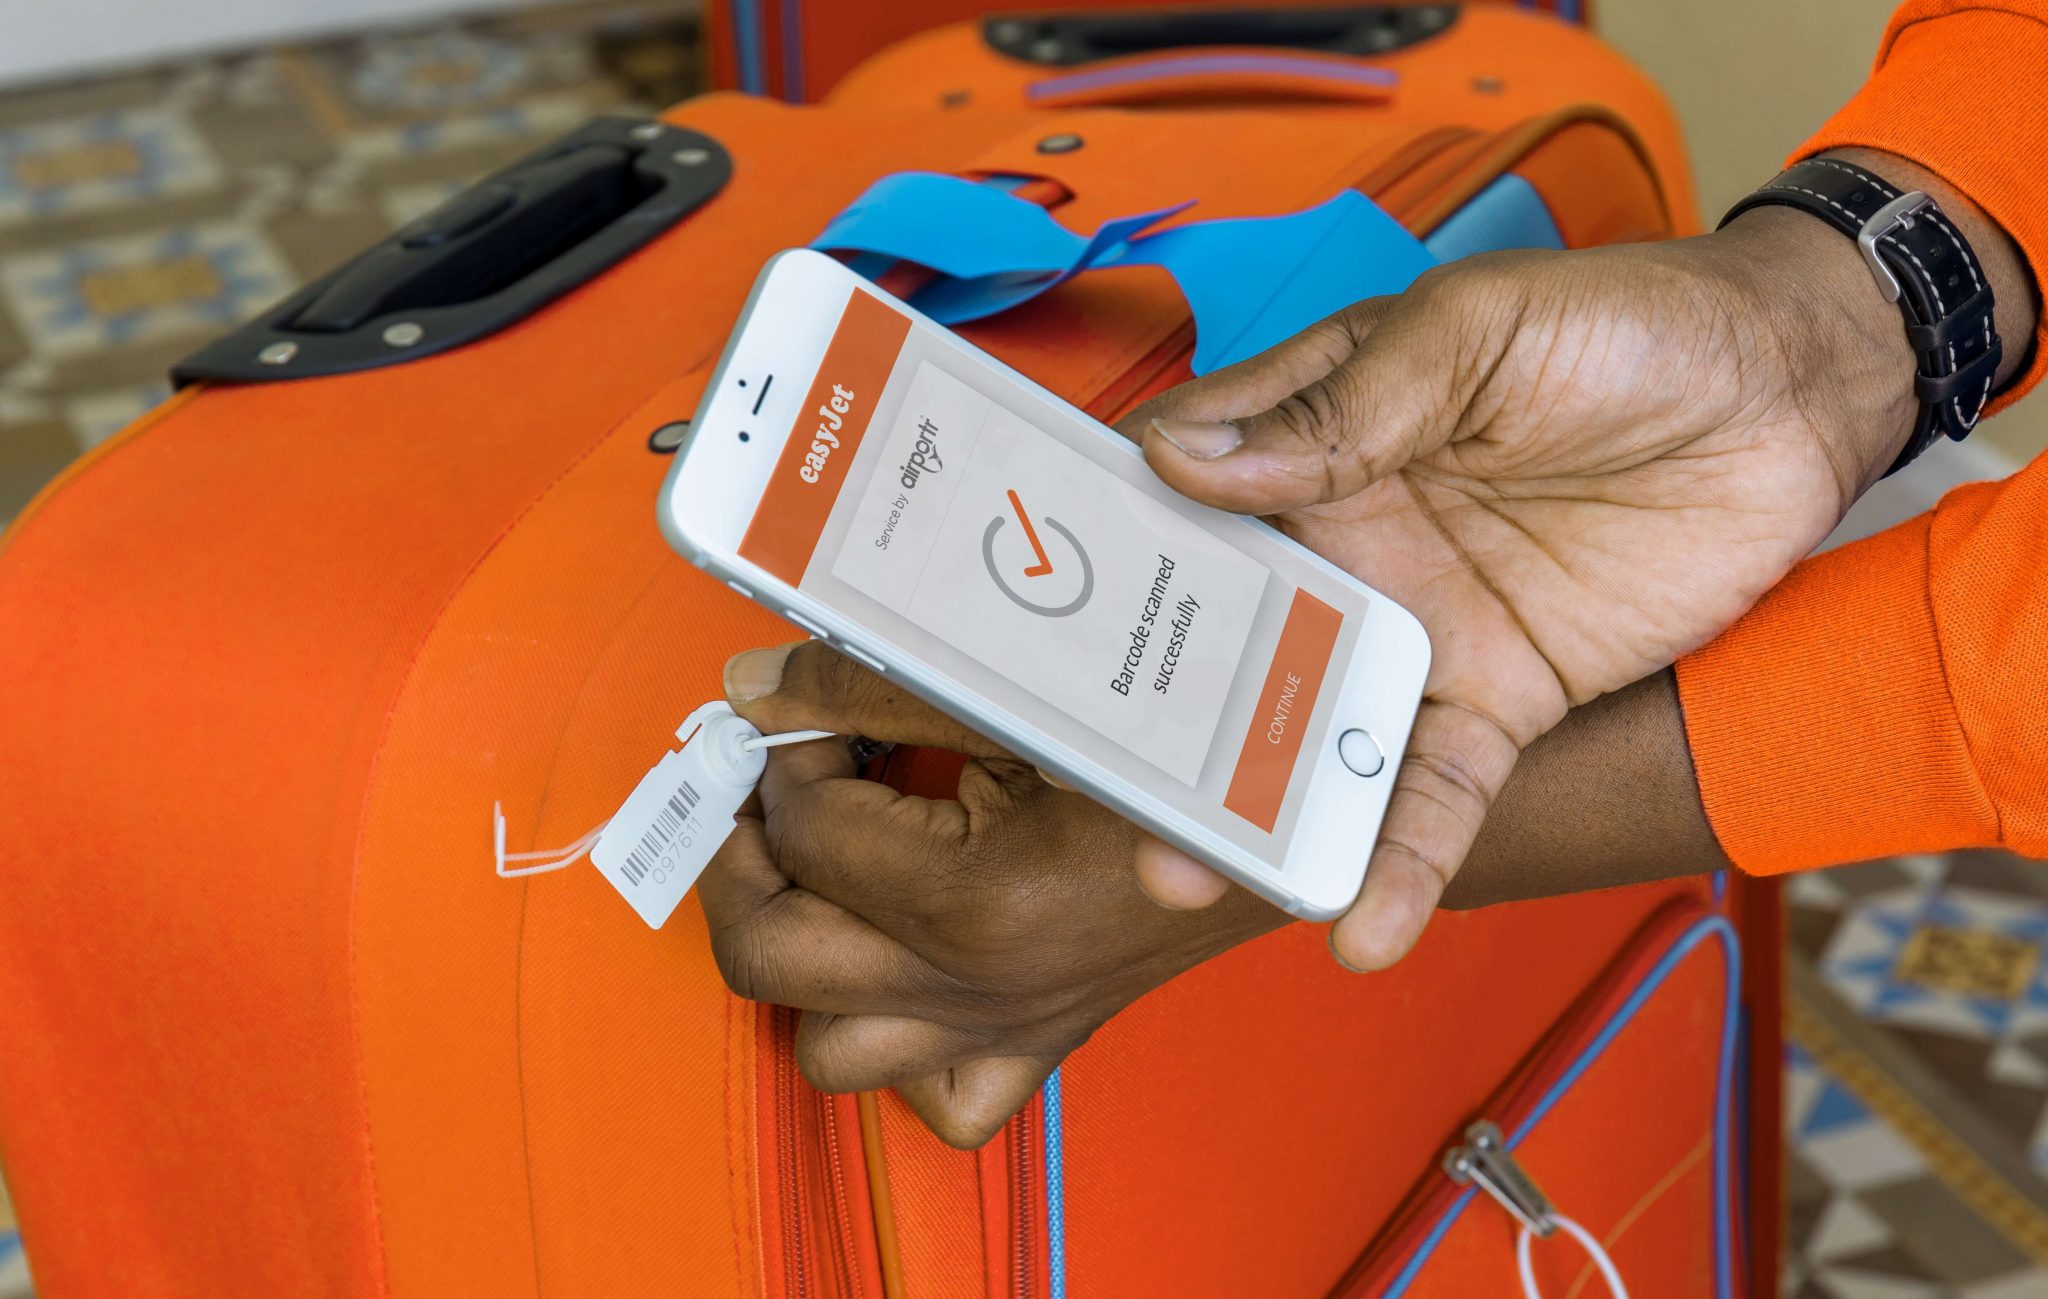 easyJet offer bag collection, delivery, and door-to-door services